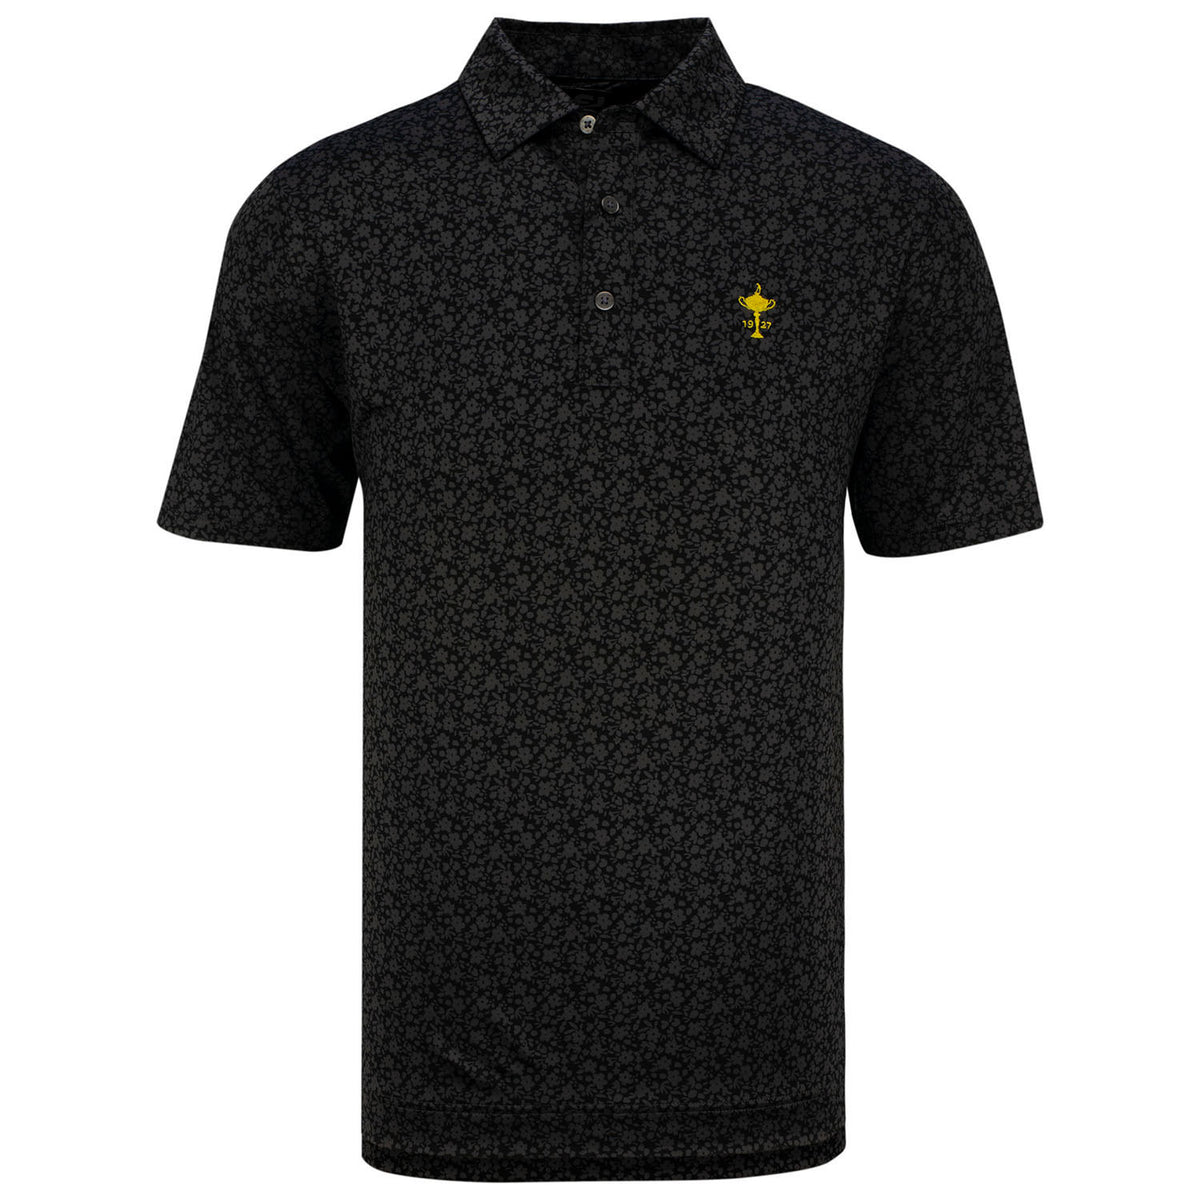 FootJoy Floral Print Polo in Black- Front View